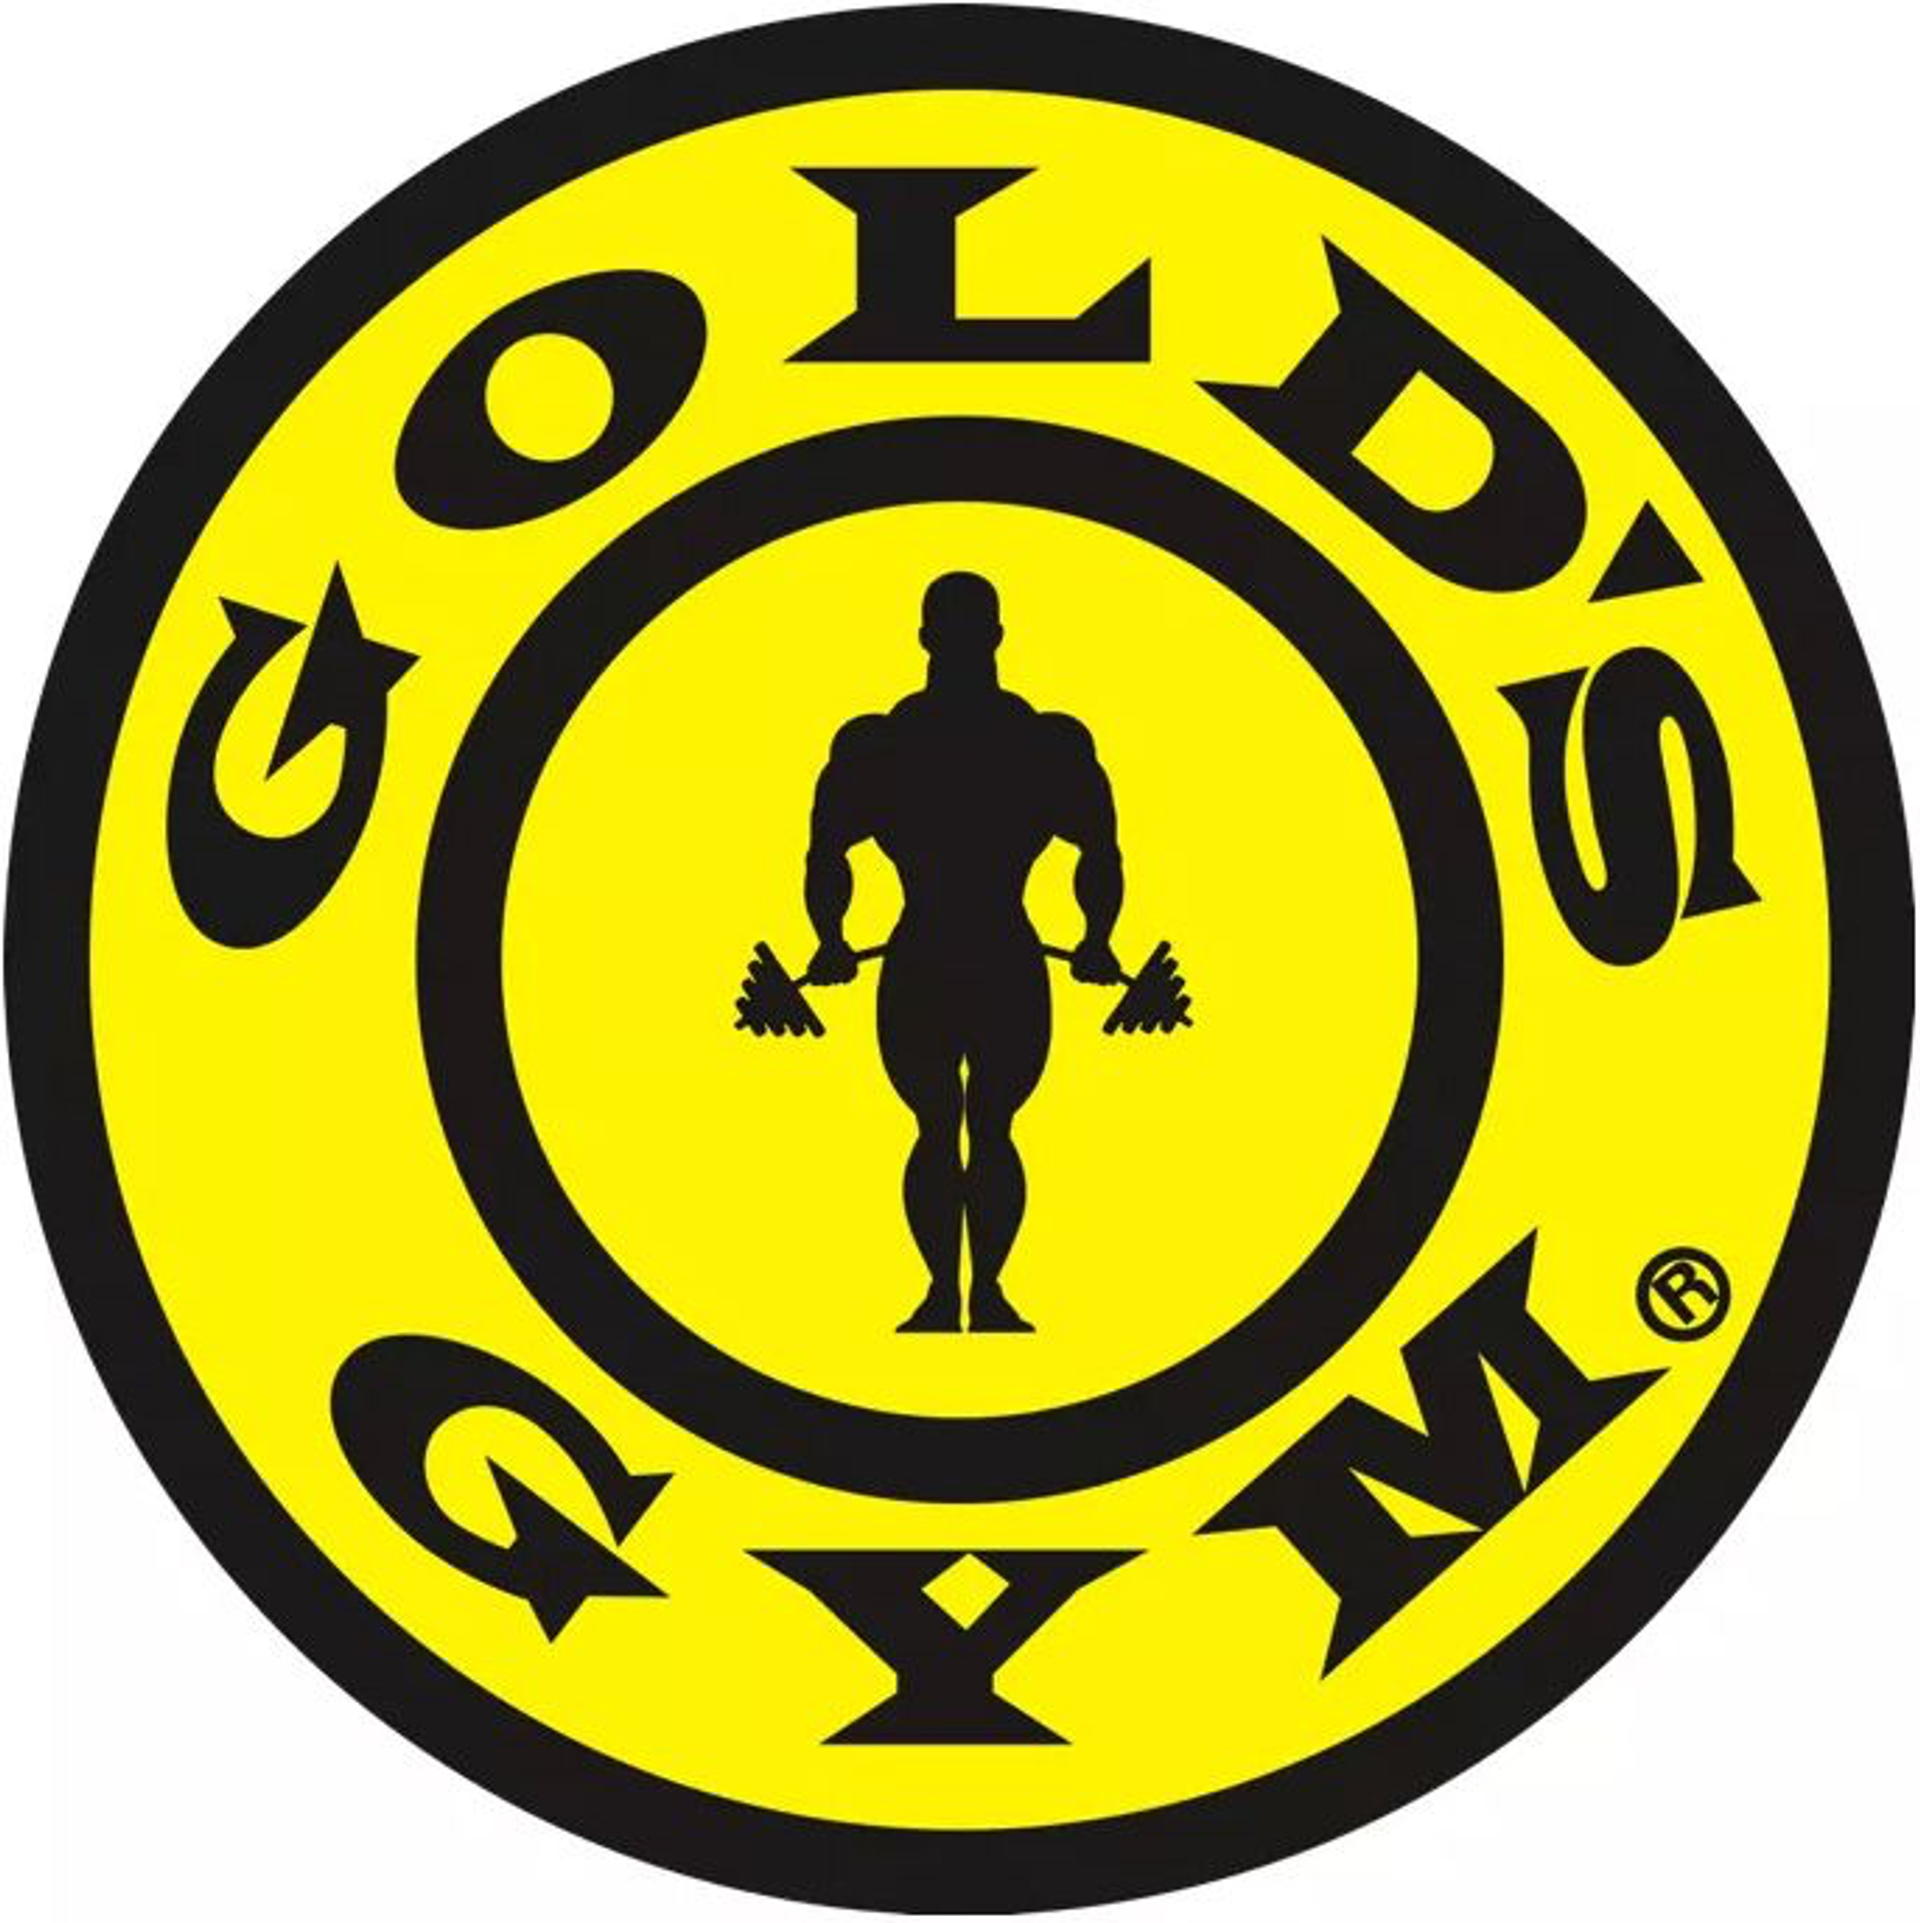 Source: Gold's Gym